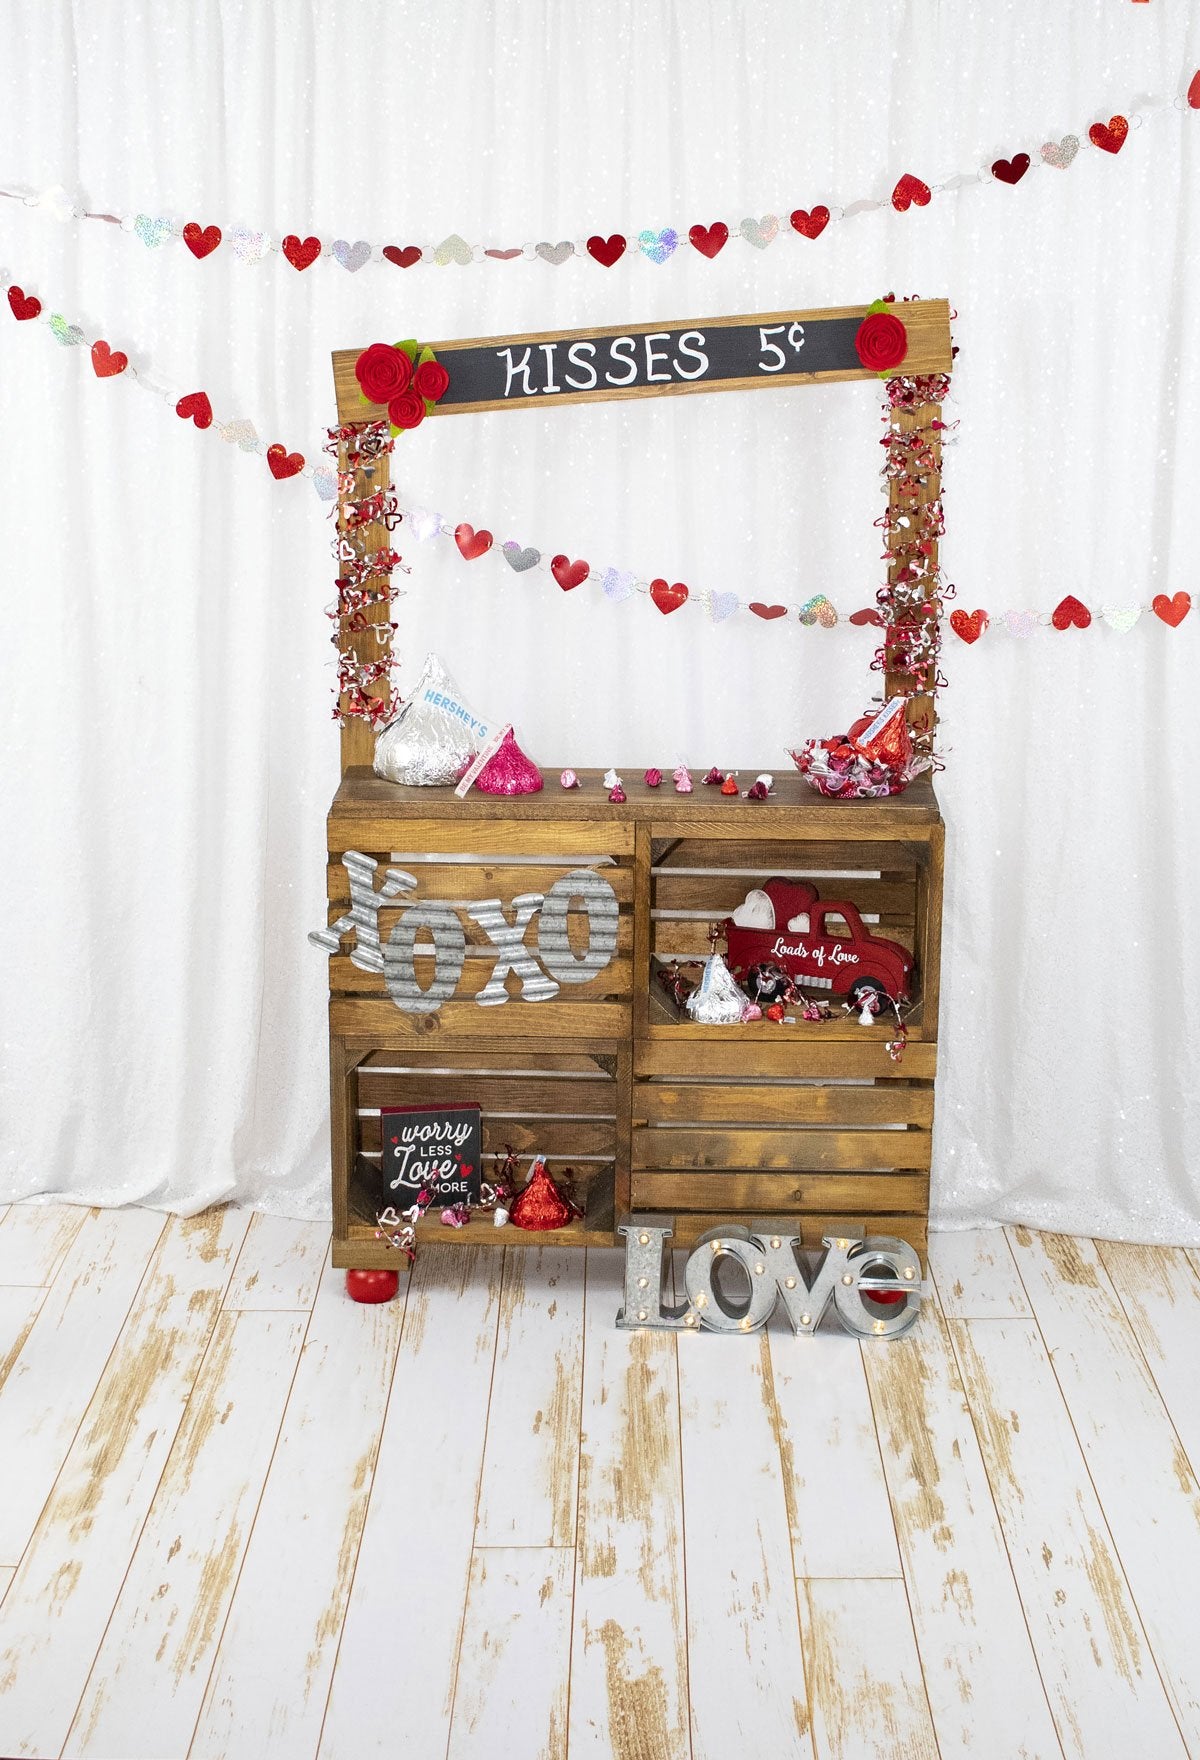 Kate White Curtain Kisses booth Valentine's Day Backdrop Designed by Leann West